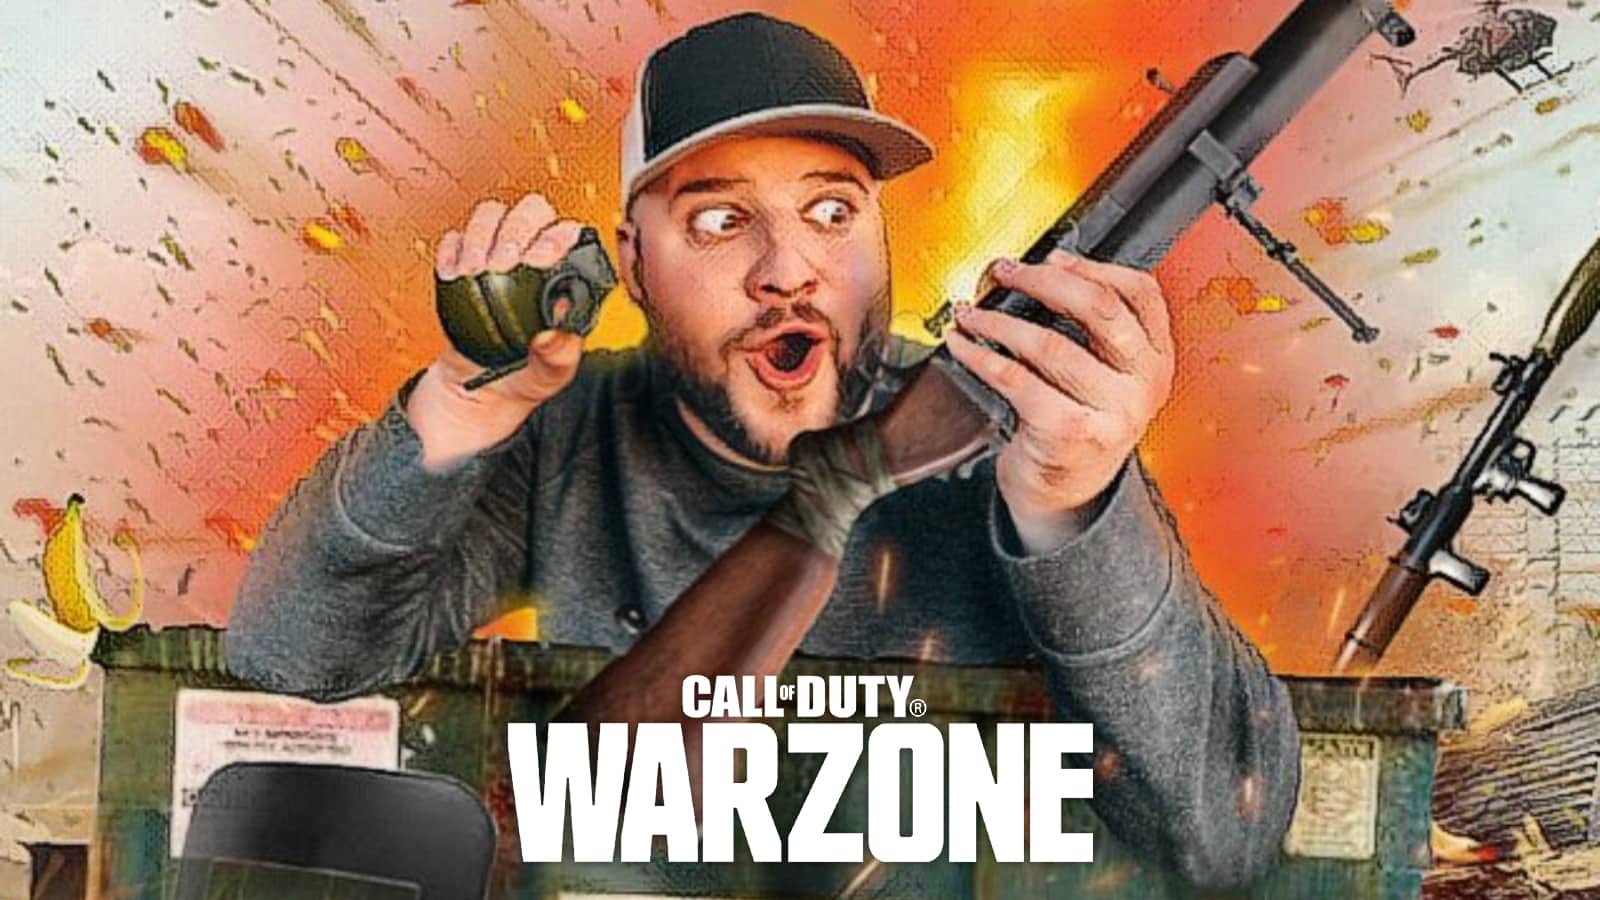 How to watch LEGIQN $30K Warzone Dumpster Derby tournament: stream, teams, format